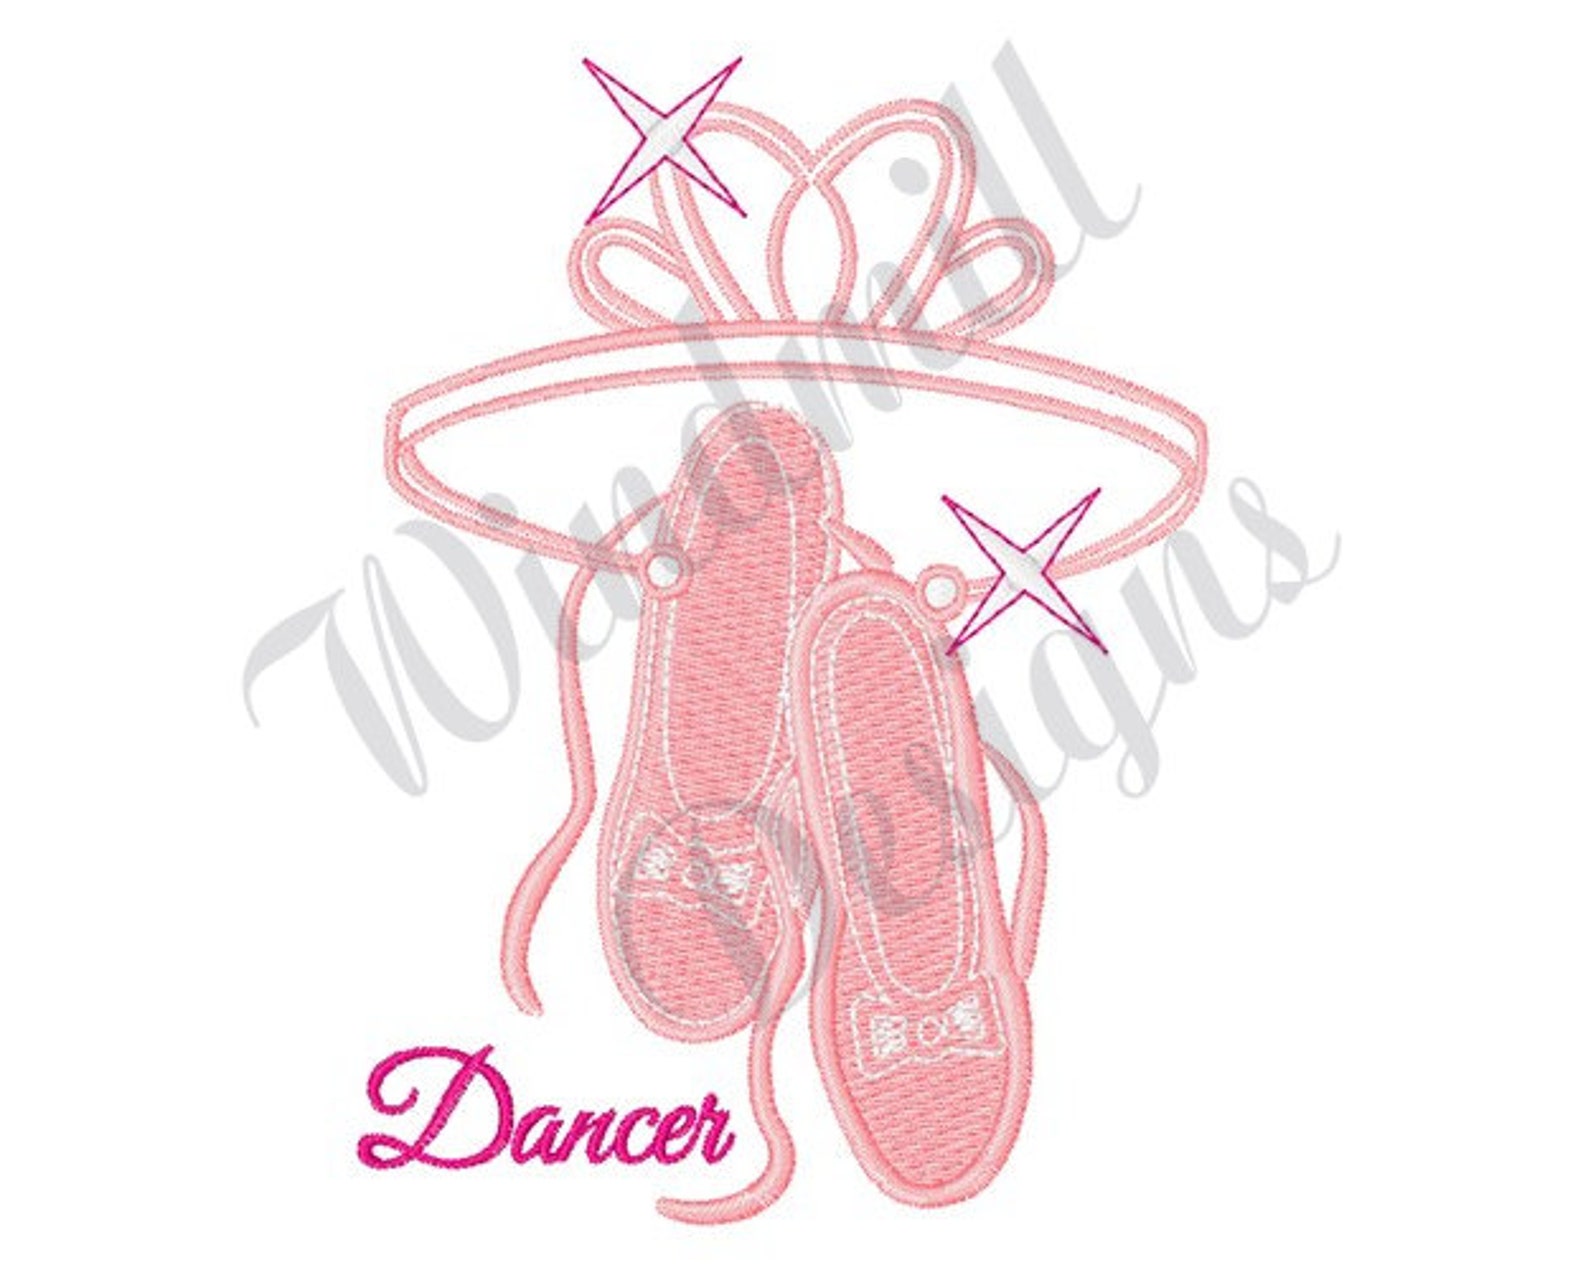 ballet slippers - machine embroidery design, embroidery designs, machine embroidery, embroidery patterns, embroidery files, inst